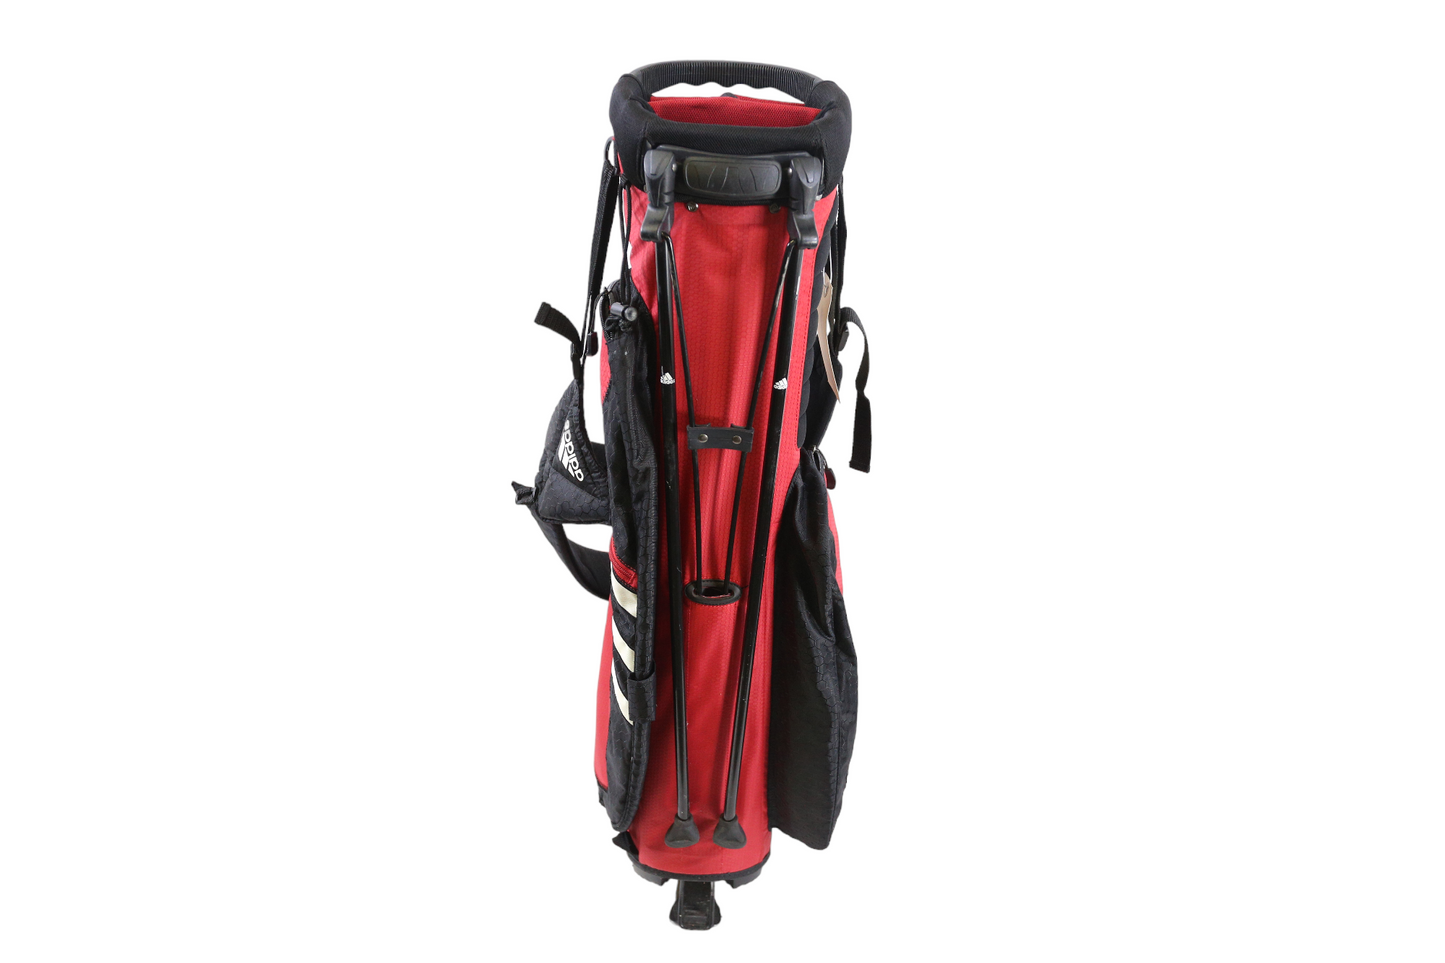 Adidas Red/Black Stand Bag 4 Dividers 5 Pockets Rain Cover